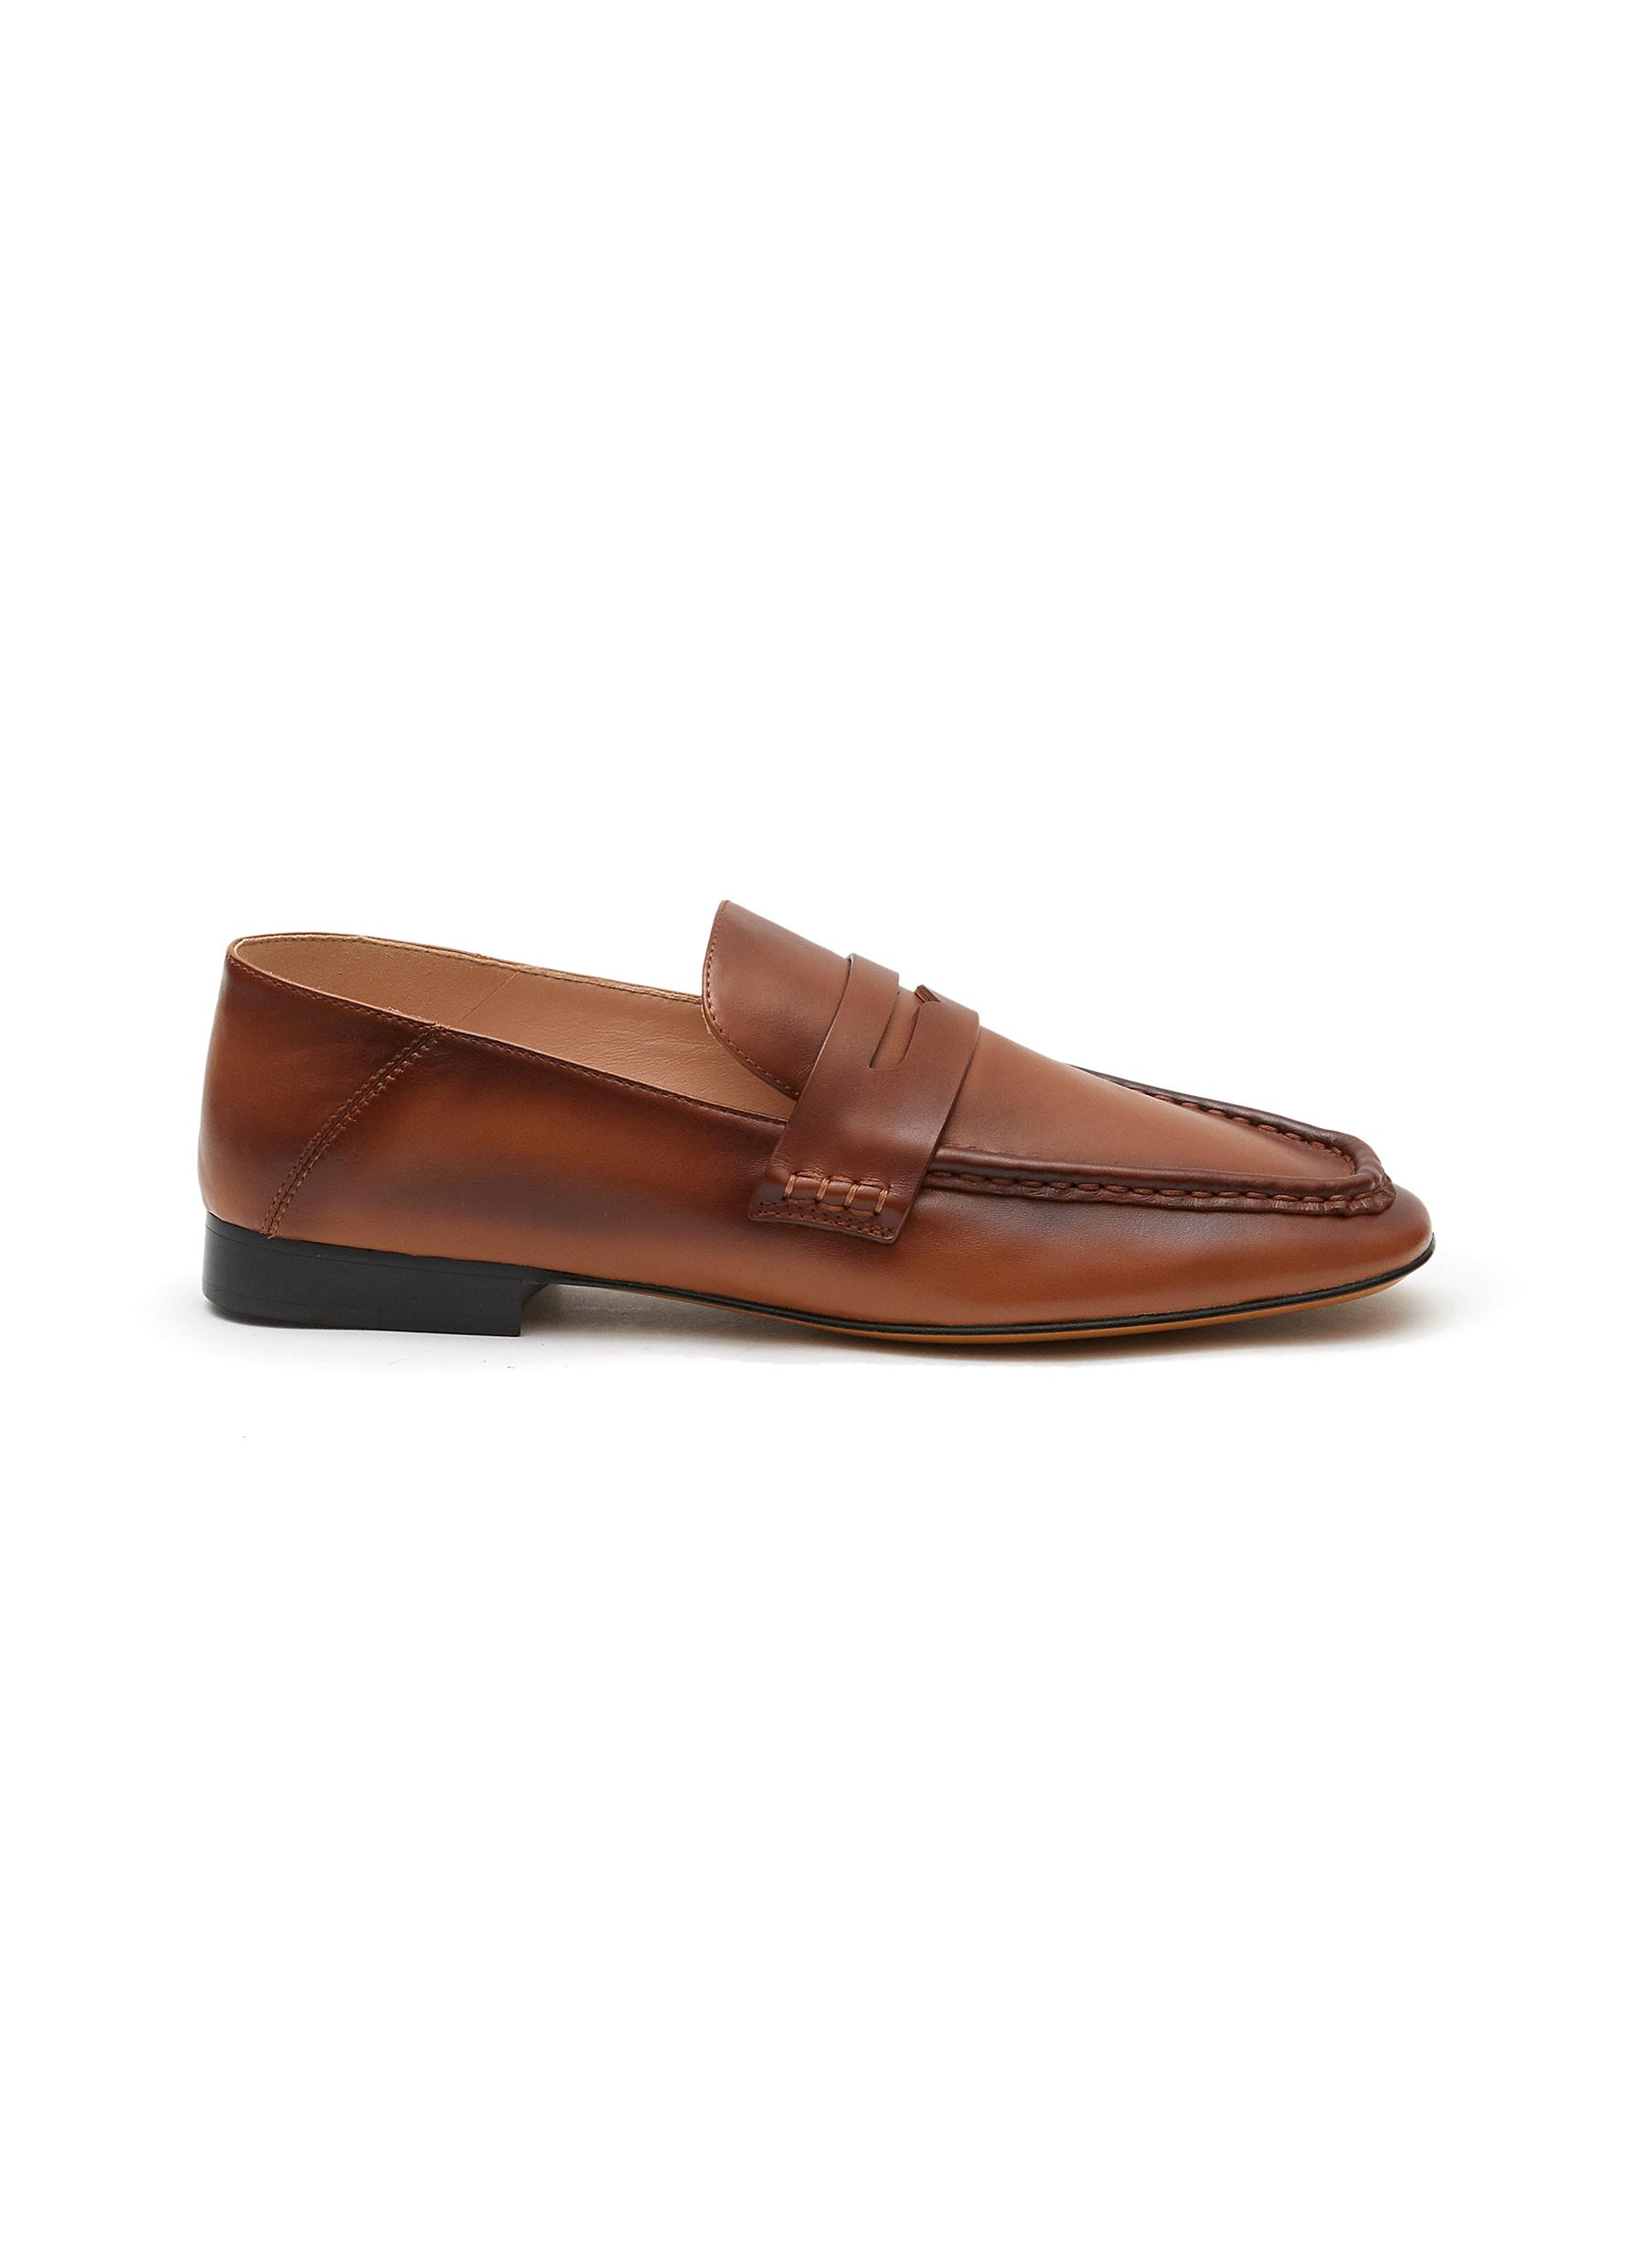 EQUIL ‘LONDON' SQUARE TOE LEATHER LOAFERS